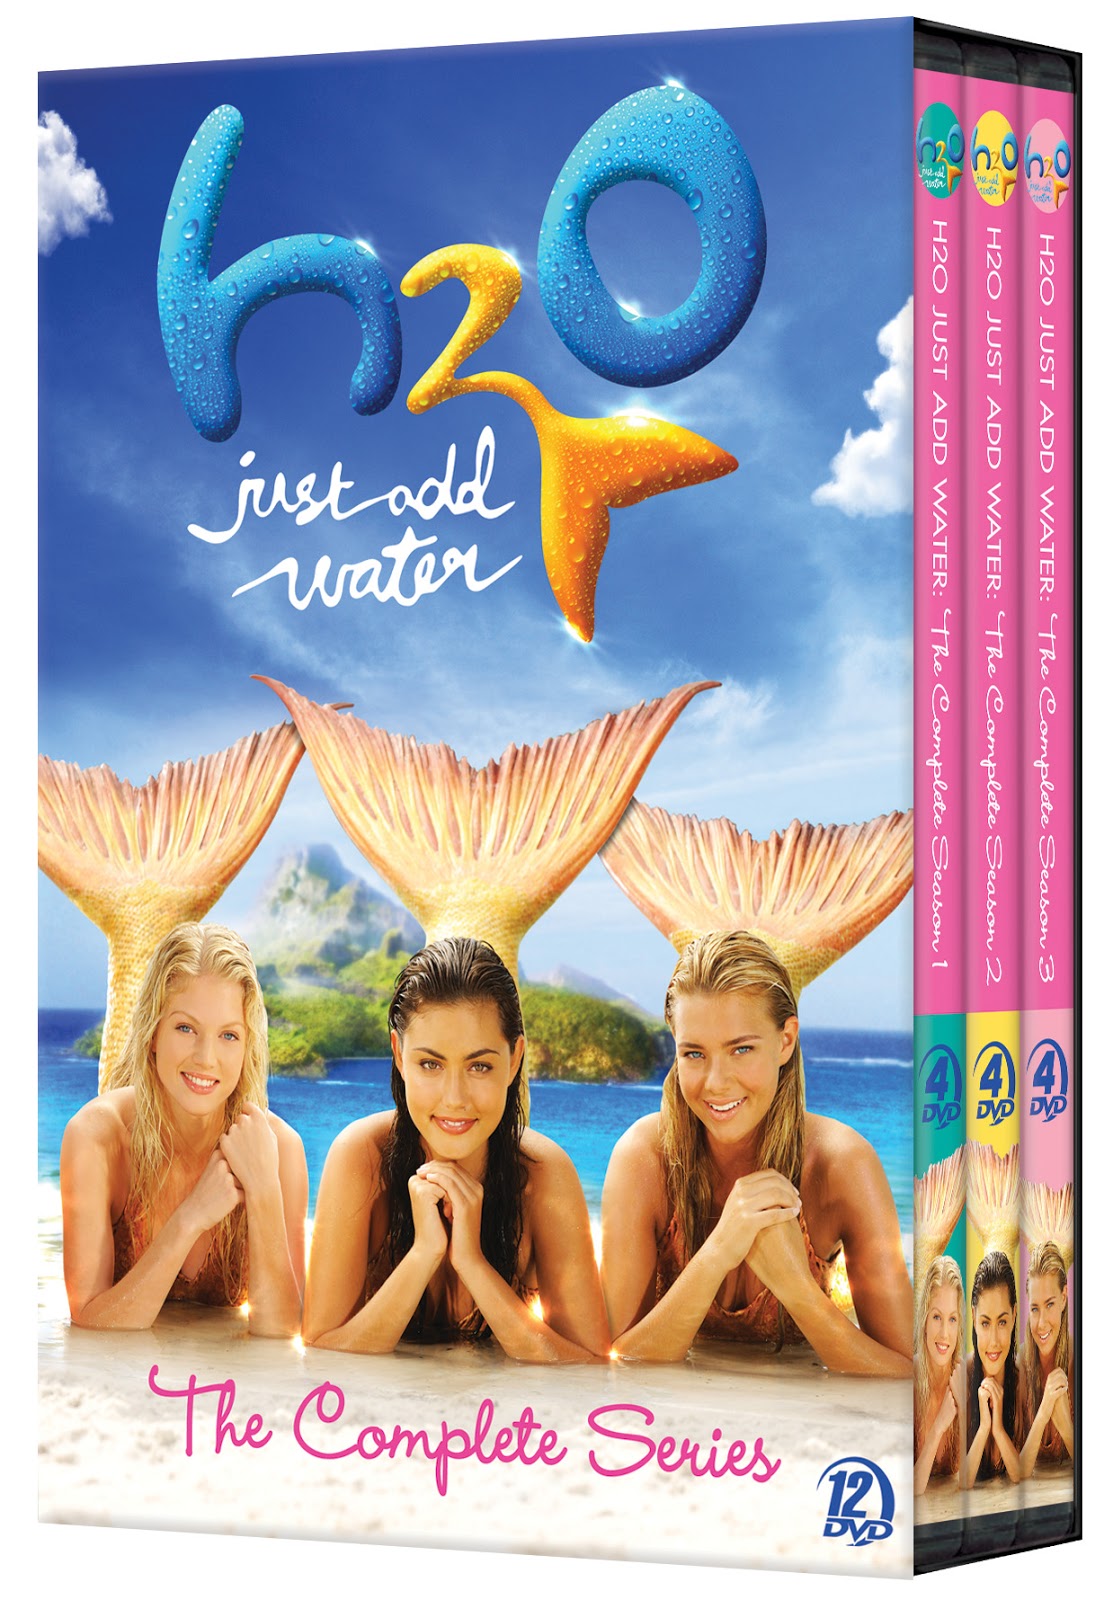 Come Be Part Of Our World : Photo  Mako mermaids, Mako mermaids season 3,  H2o mermaids